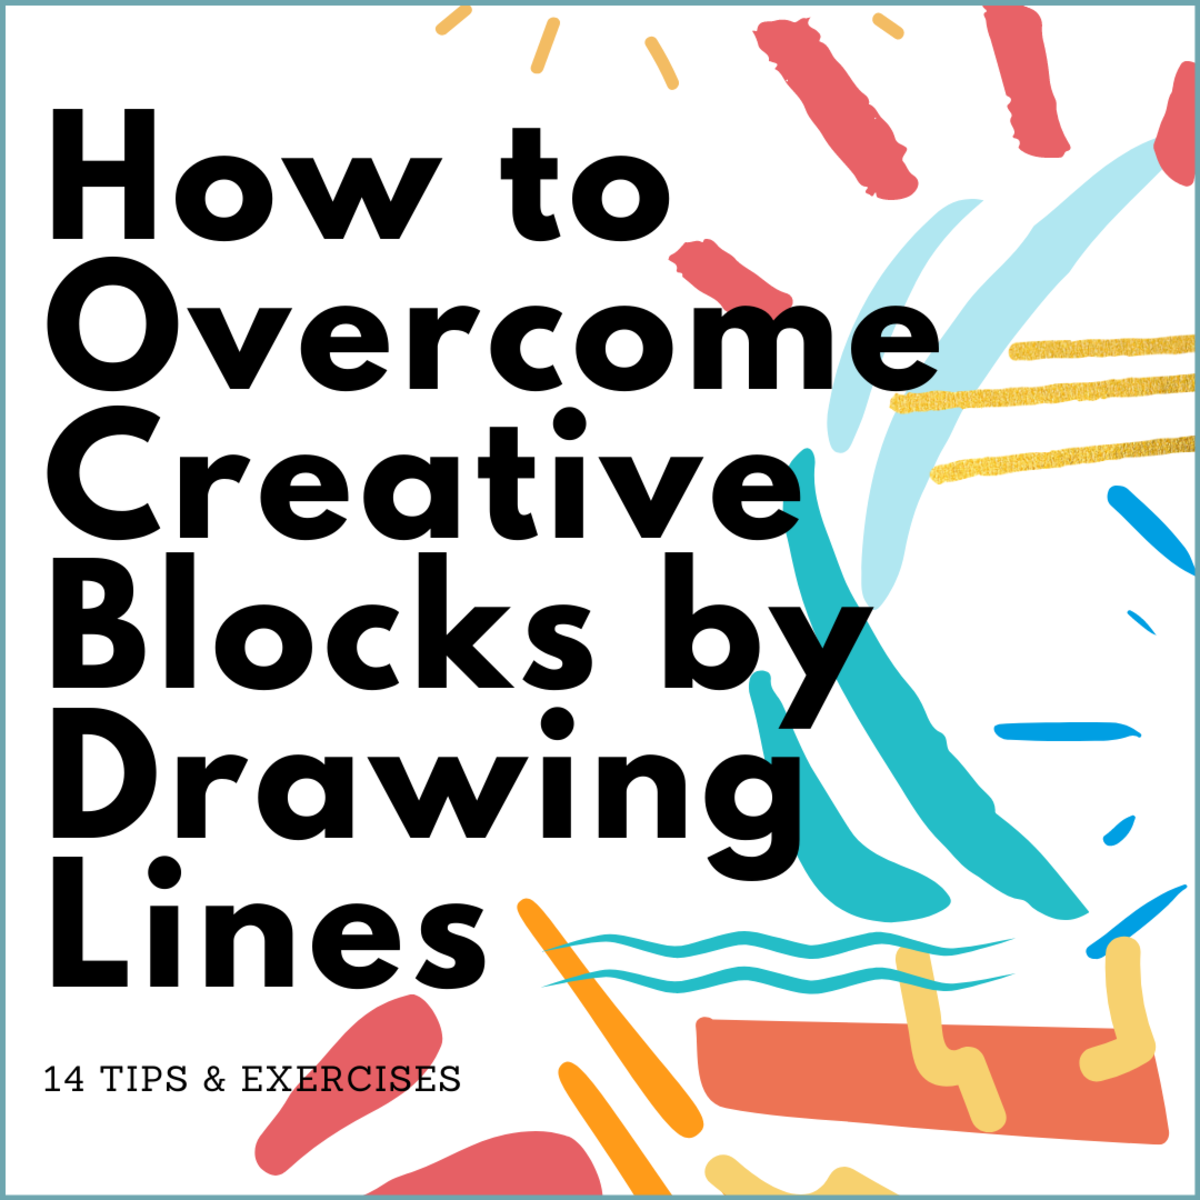 How Drawing Lines Can Lift Your Creative Block